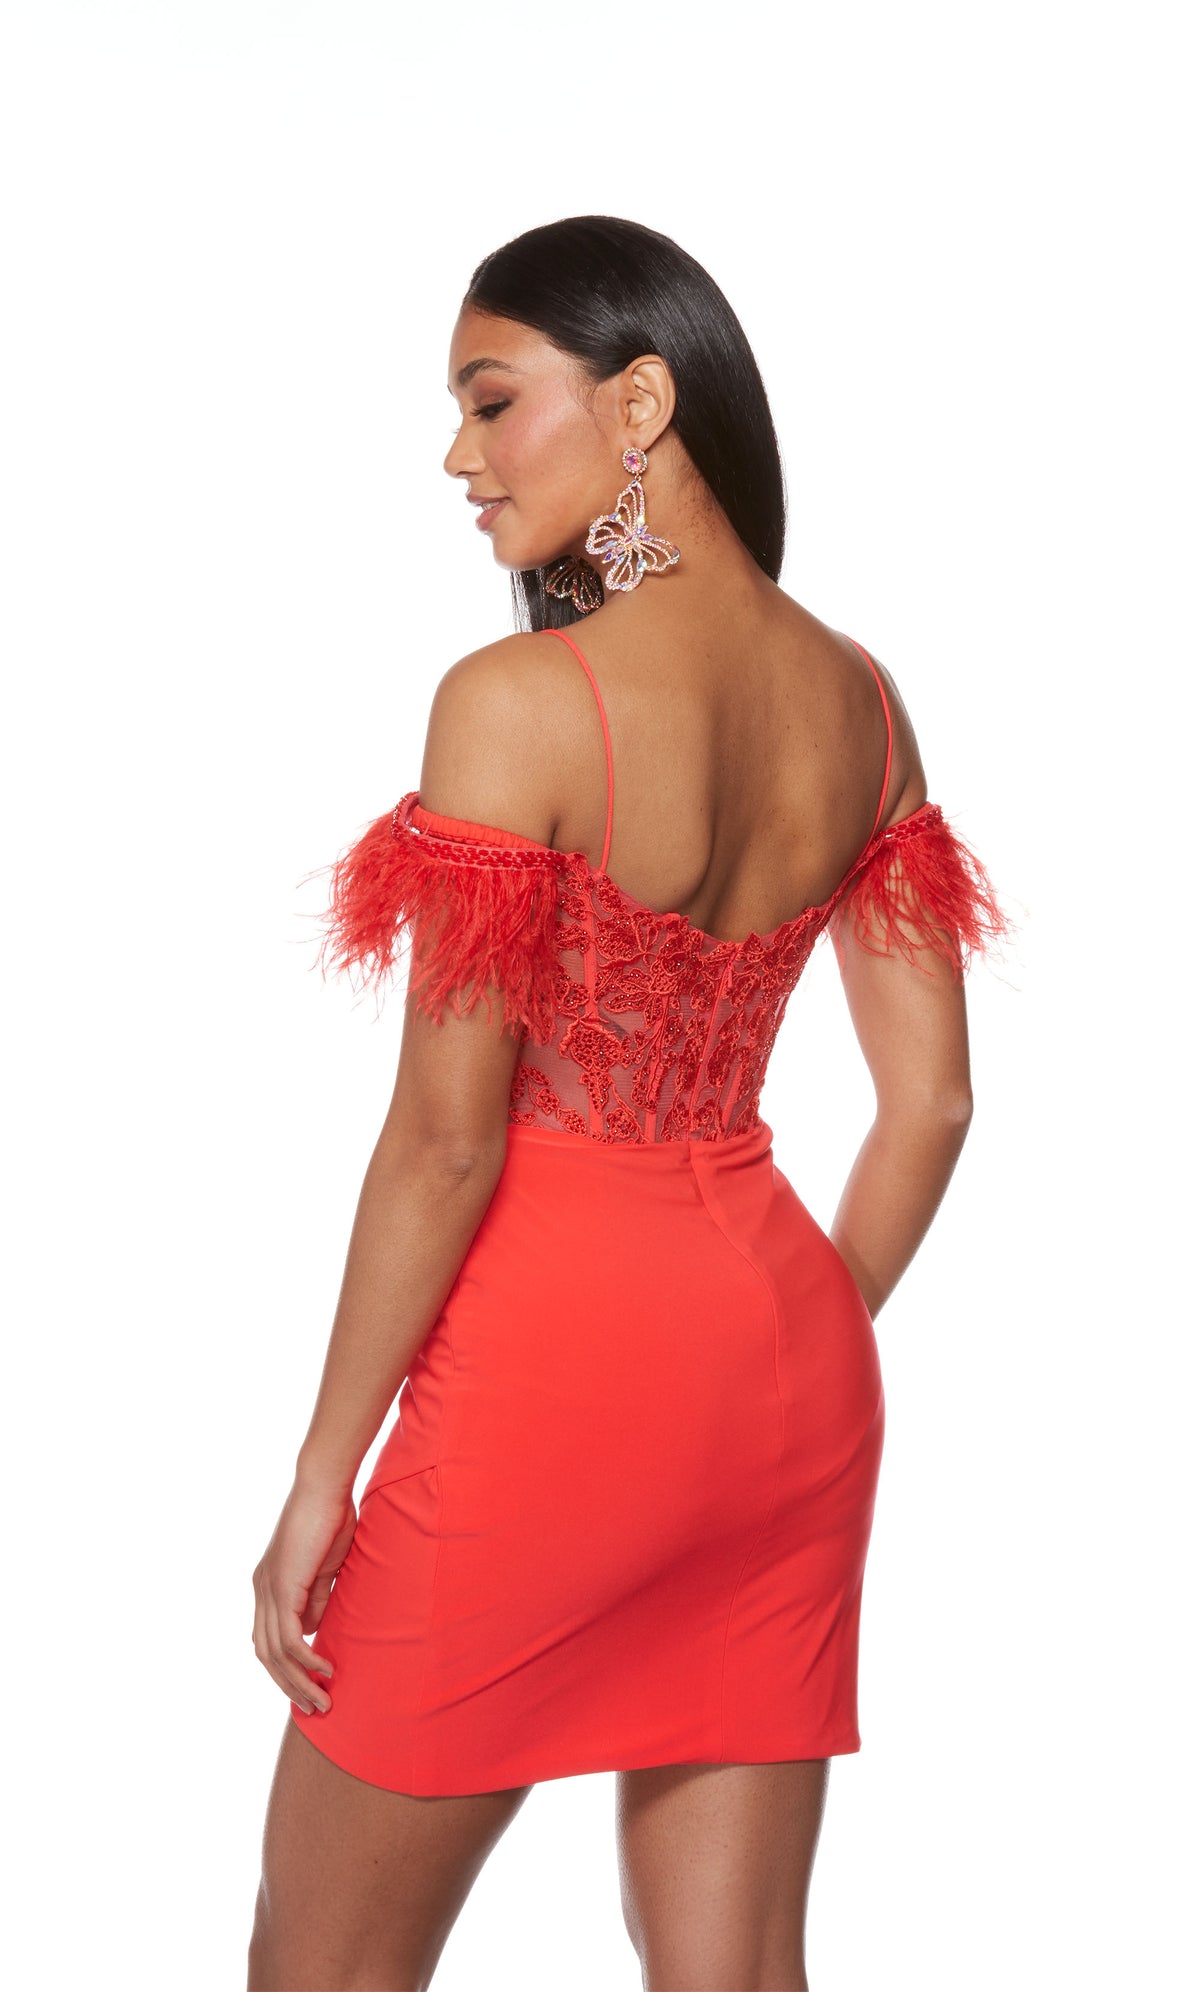 A spicy red corset dress with a sheer lace bodice, feather trim sleeves, and spaghetti straps. The skirt has a fun asymmetrical hem and is crafted from a stretchy, Jersey fabric.